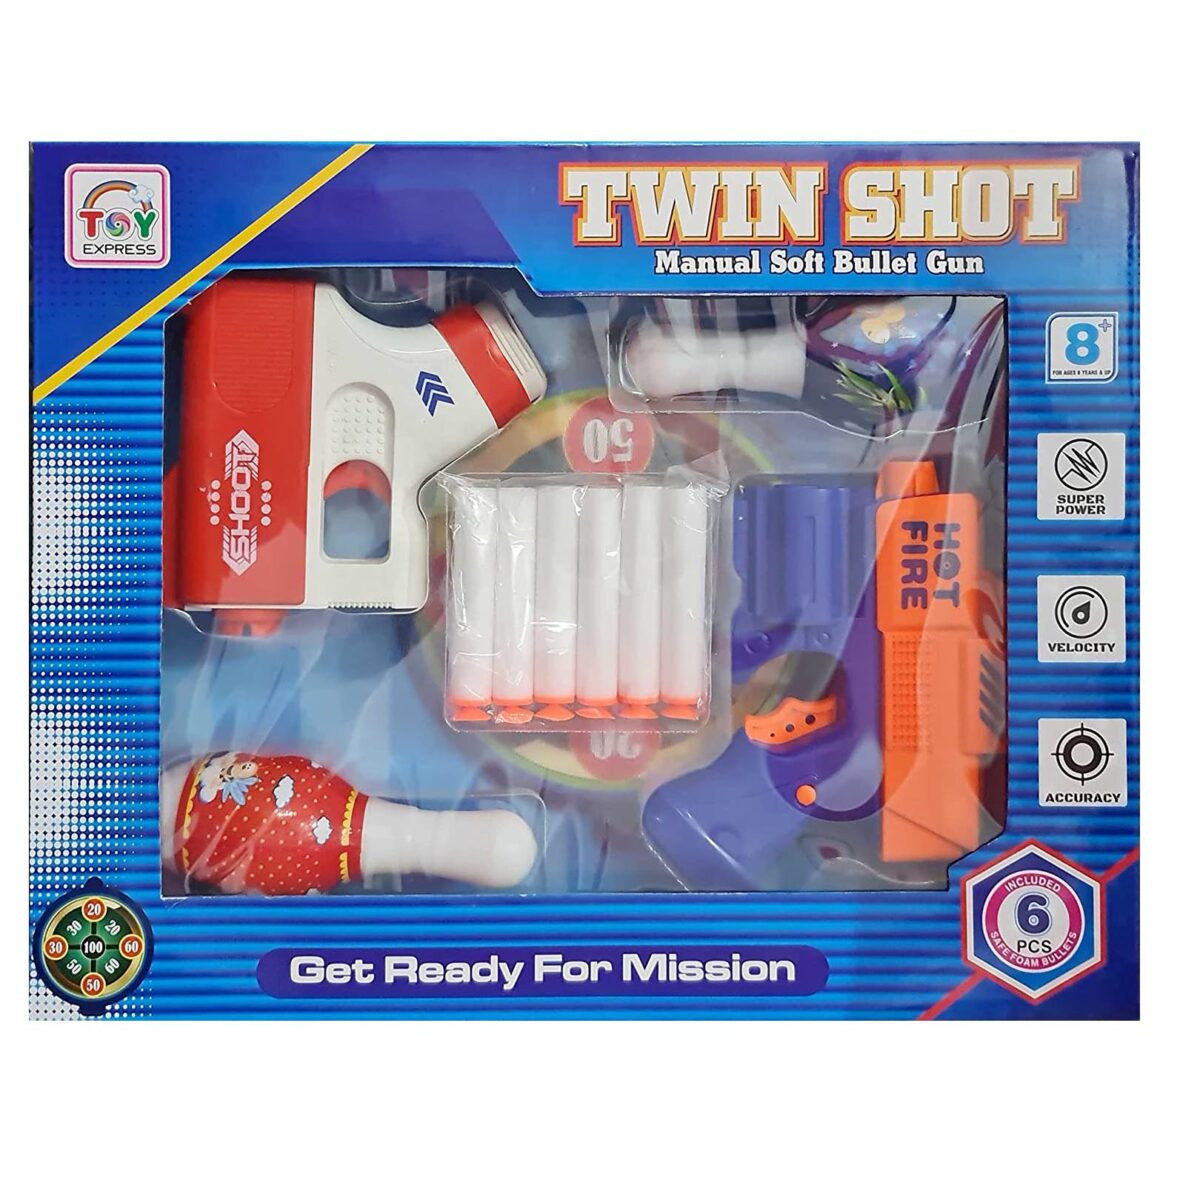 Twin Shot Manual Soft Bullet Gun with 6 Foam Bullets, Set of Two Compact & Light Toy Multicolor Guns for Kids, Durable and Safe Design, Easy to Operate for Shooting Imaginary Targets